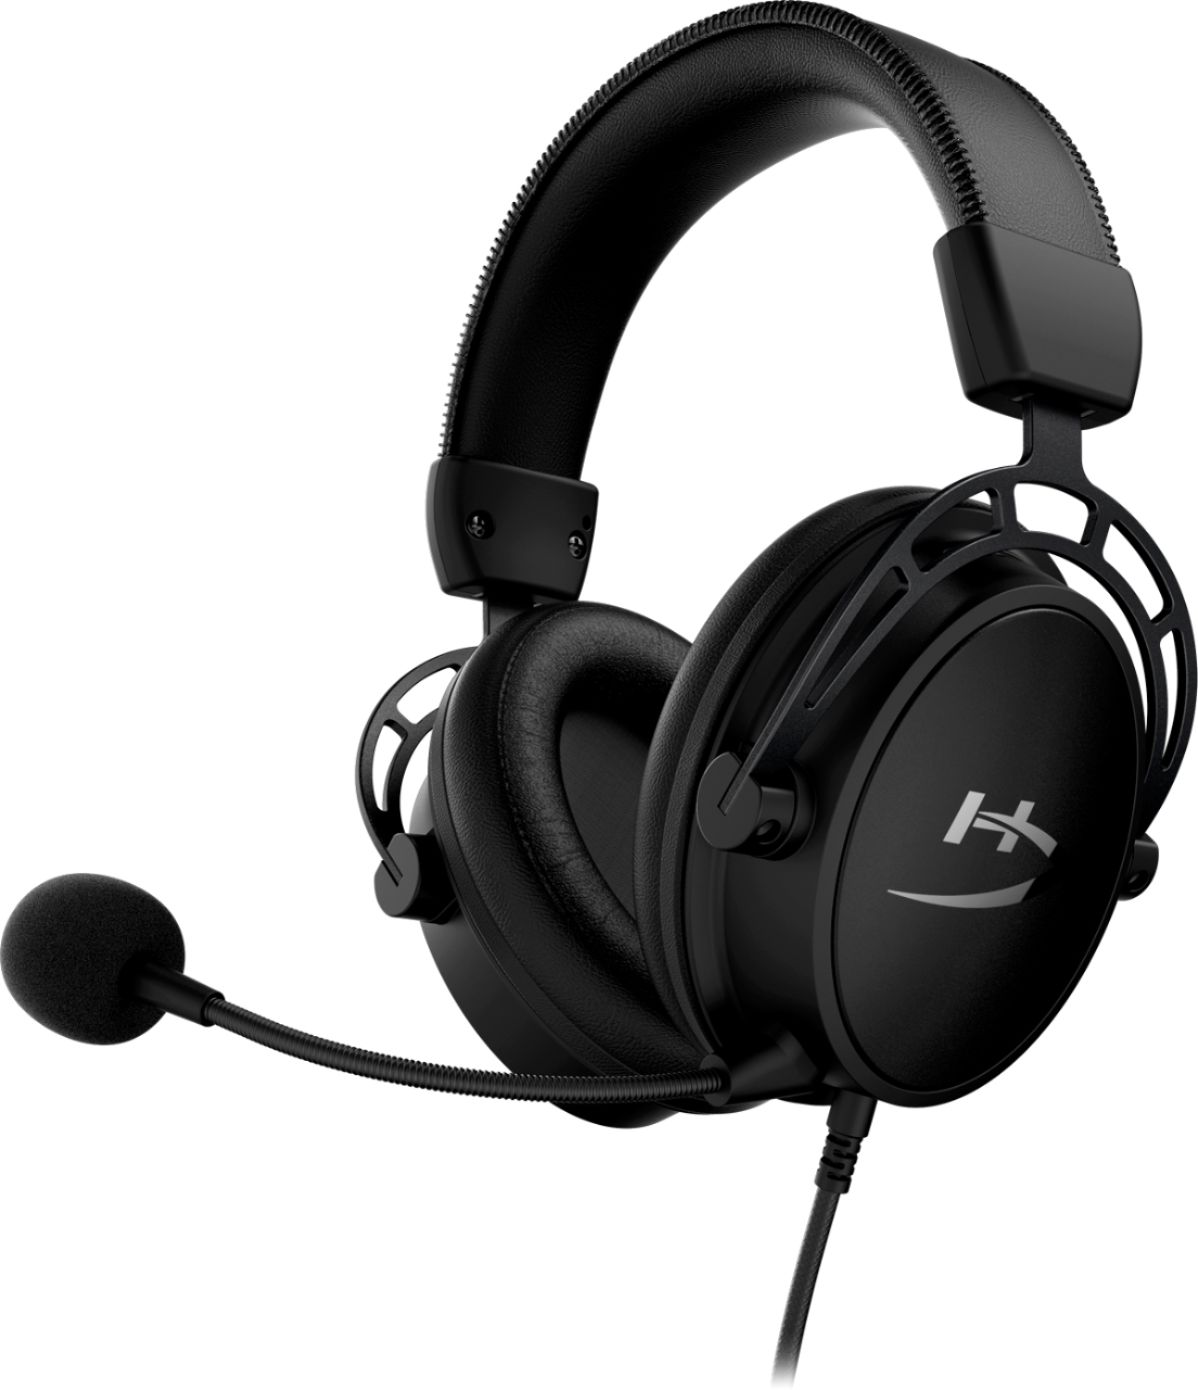 HyperX - Cloud Alpha Pro Wired Stereo Gaming Headset, for PC, PS4, Xbox One - Blackout - Black $59.99